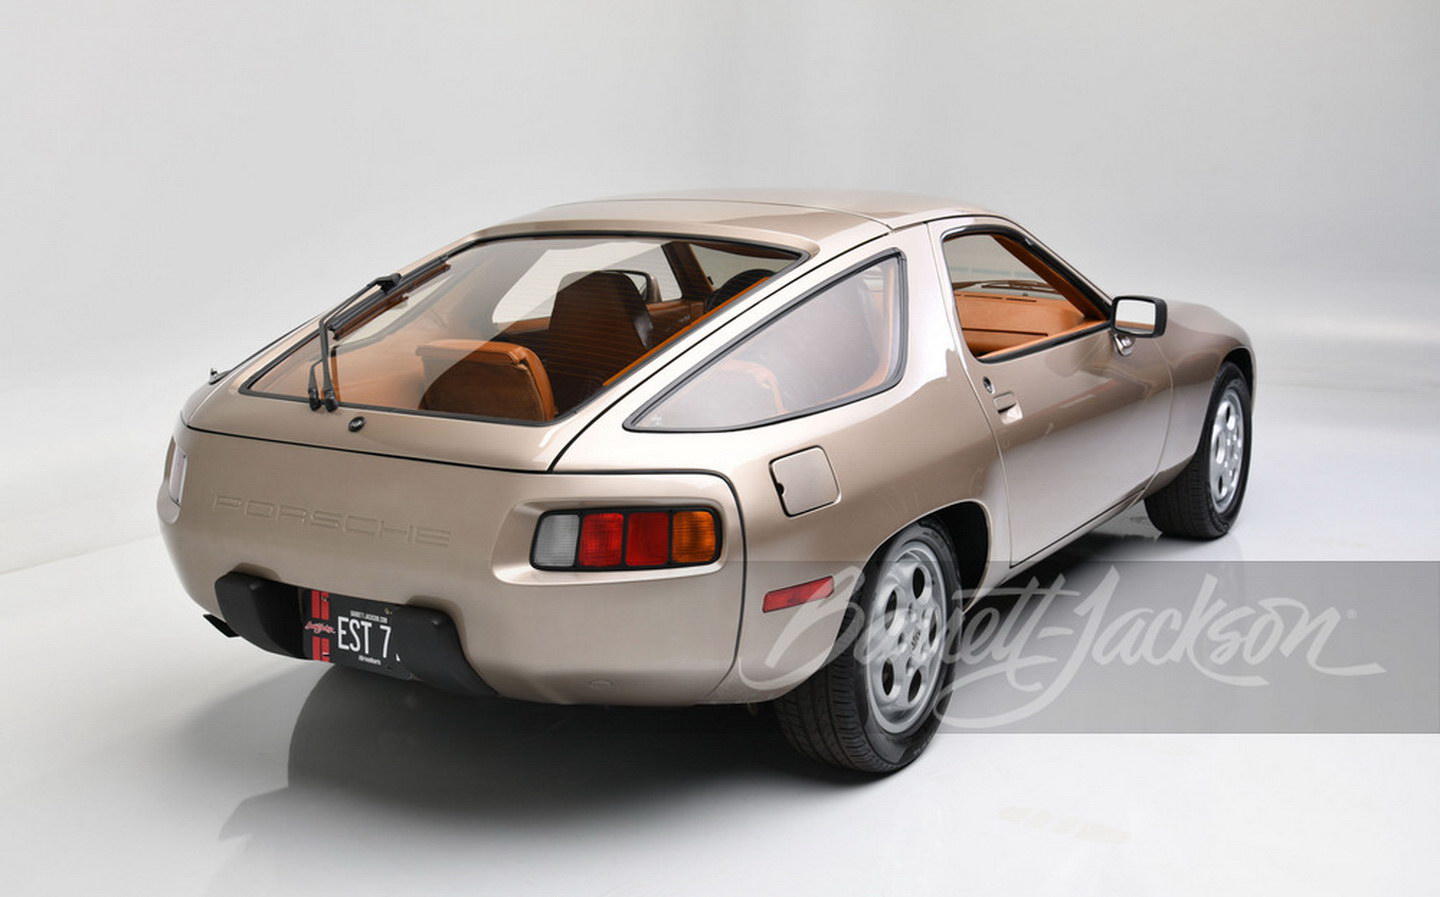 Porsche 928 driven by Tom Cruise in 'Risky Business' sells at Barrett-Jackson auction